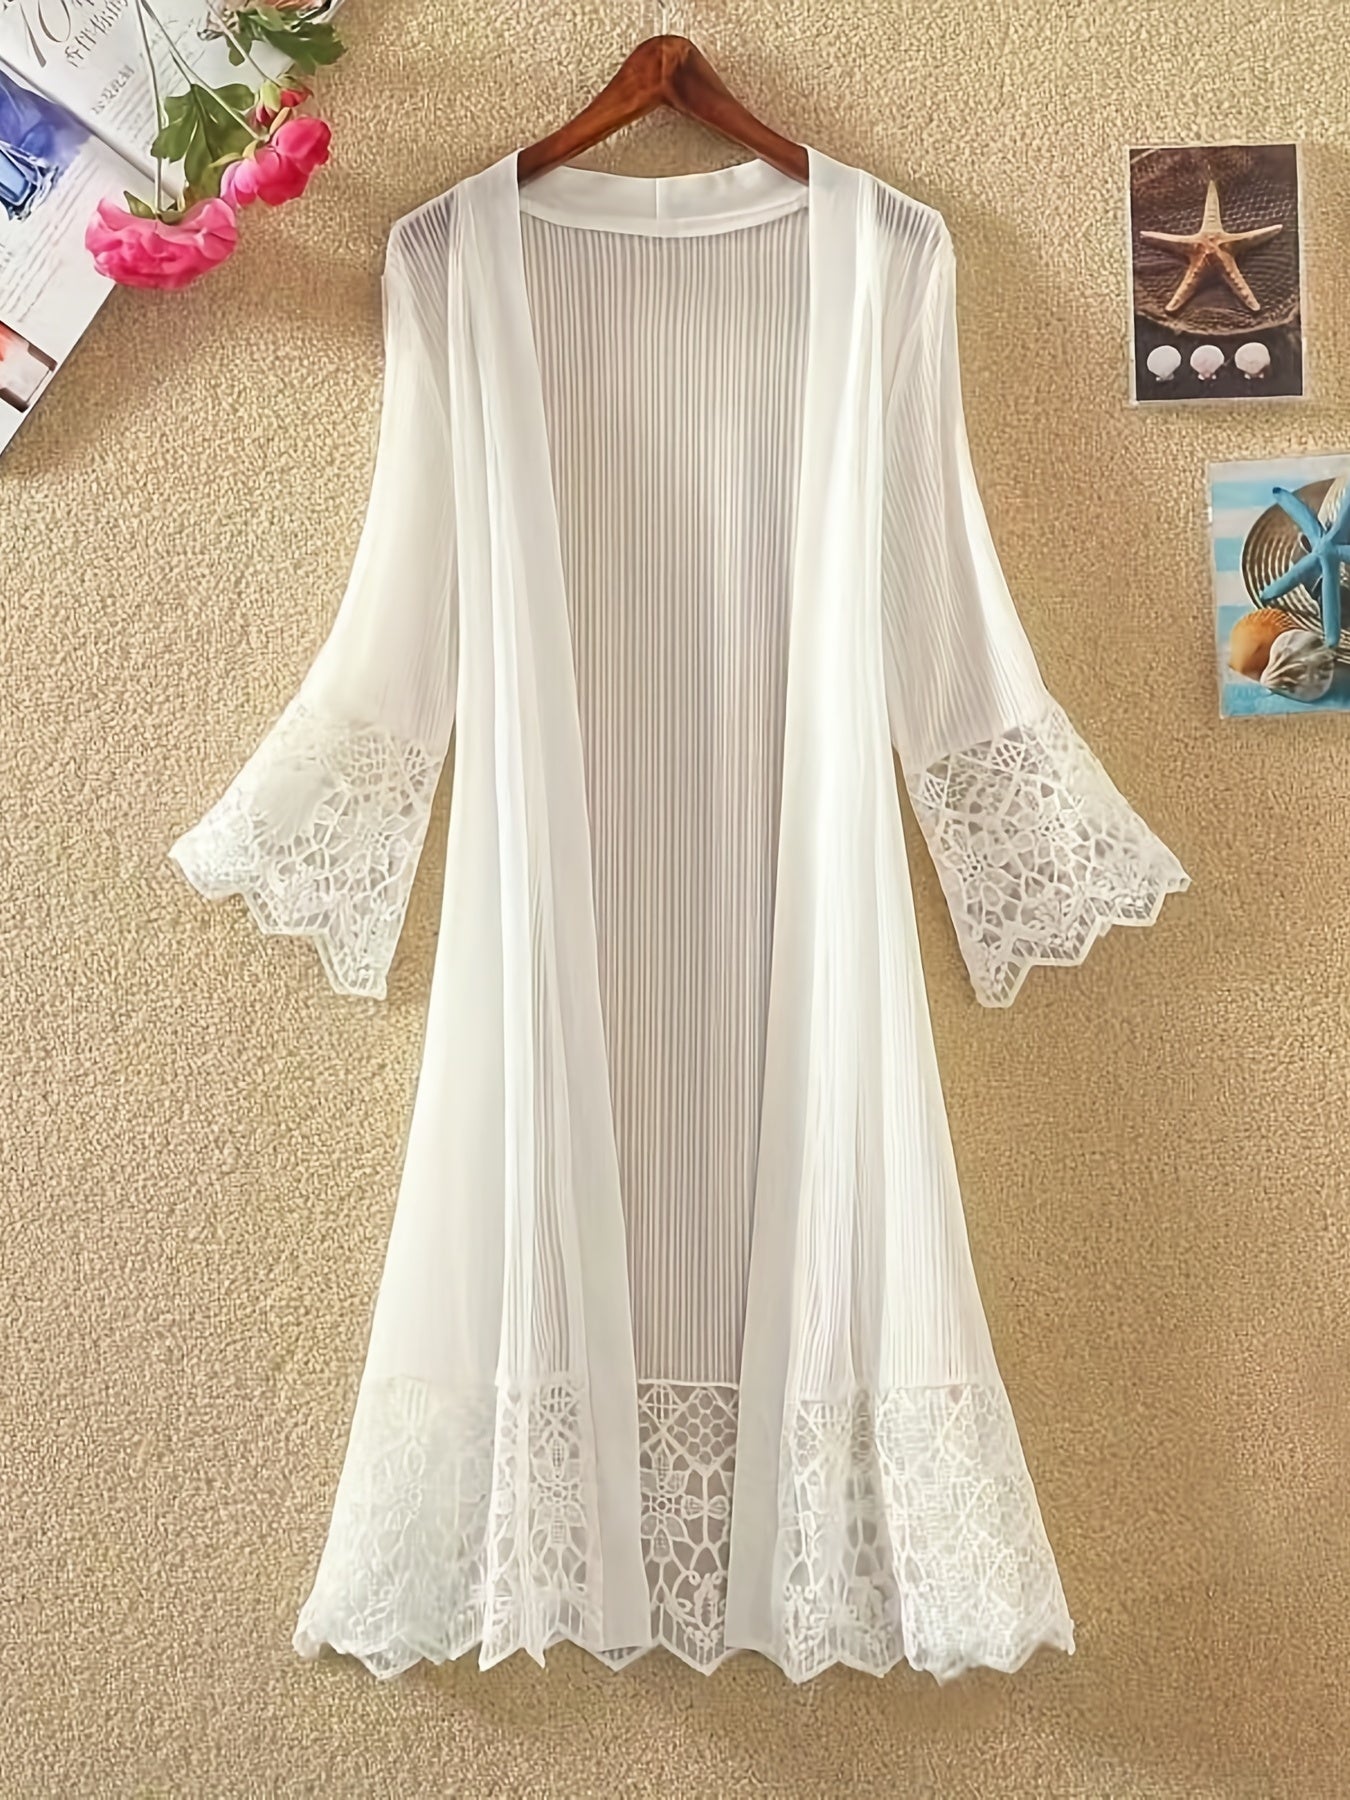 Lace Eyelet Embroidery White Cover Up & Floral Embroidered Cover Up - Beach Chic Lace Dresses for Women's Swimwear & Clothing